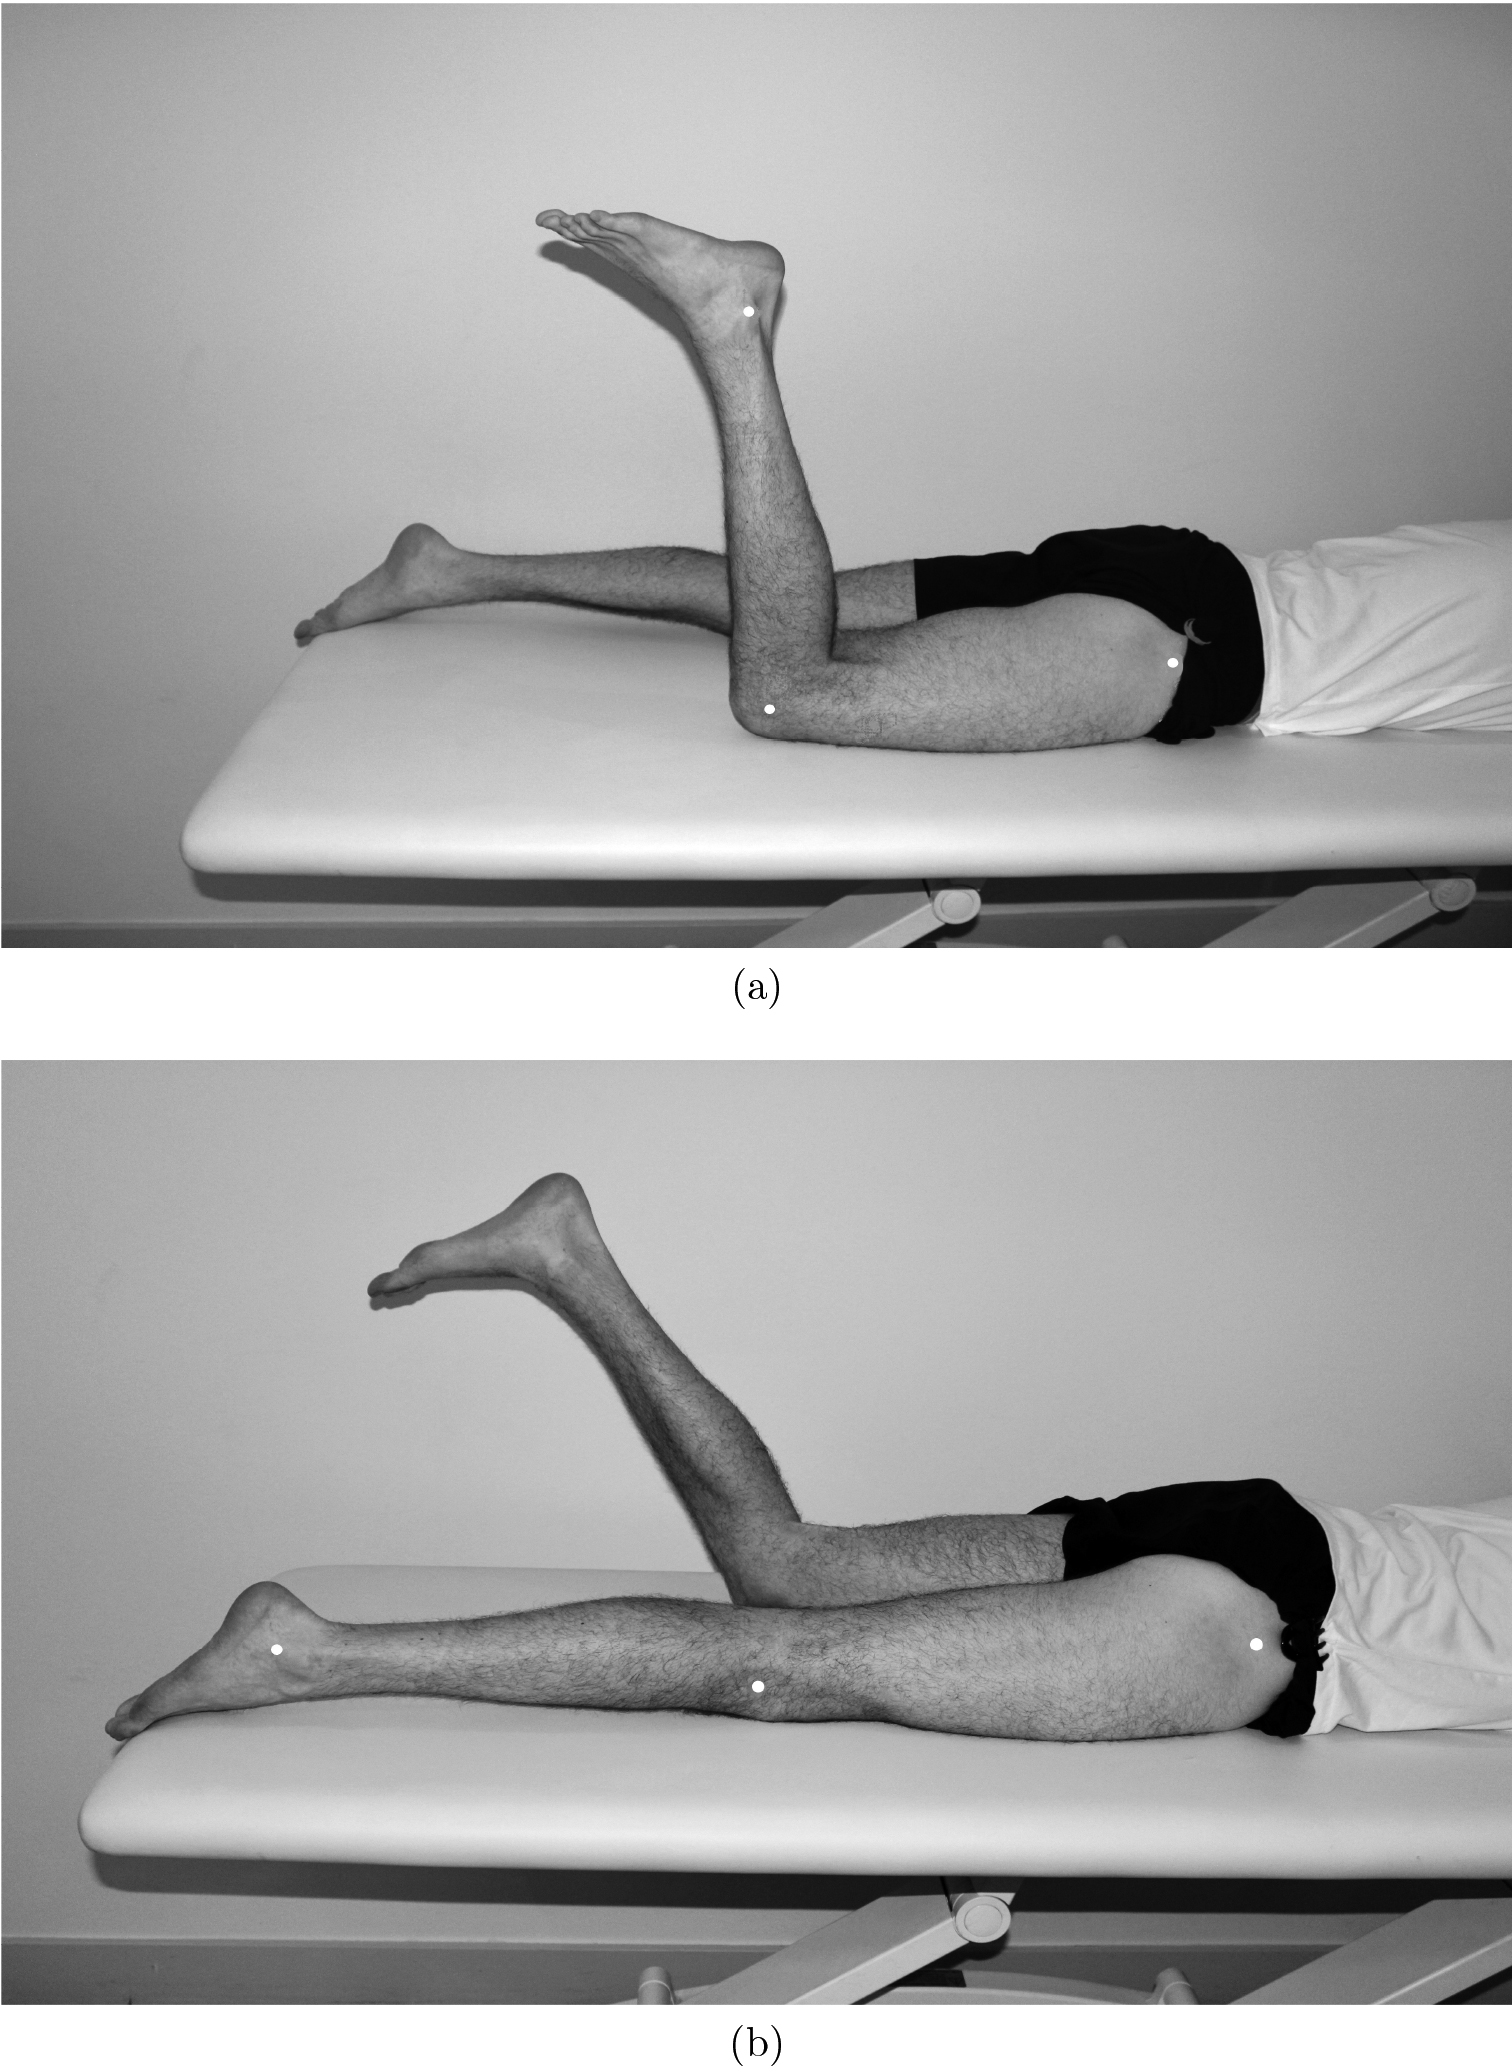 Knee angle reproduction test: a prone position, starting from flexion, b prone position, starting from extension.